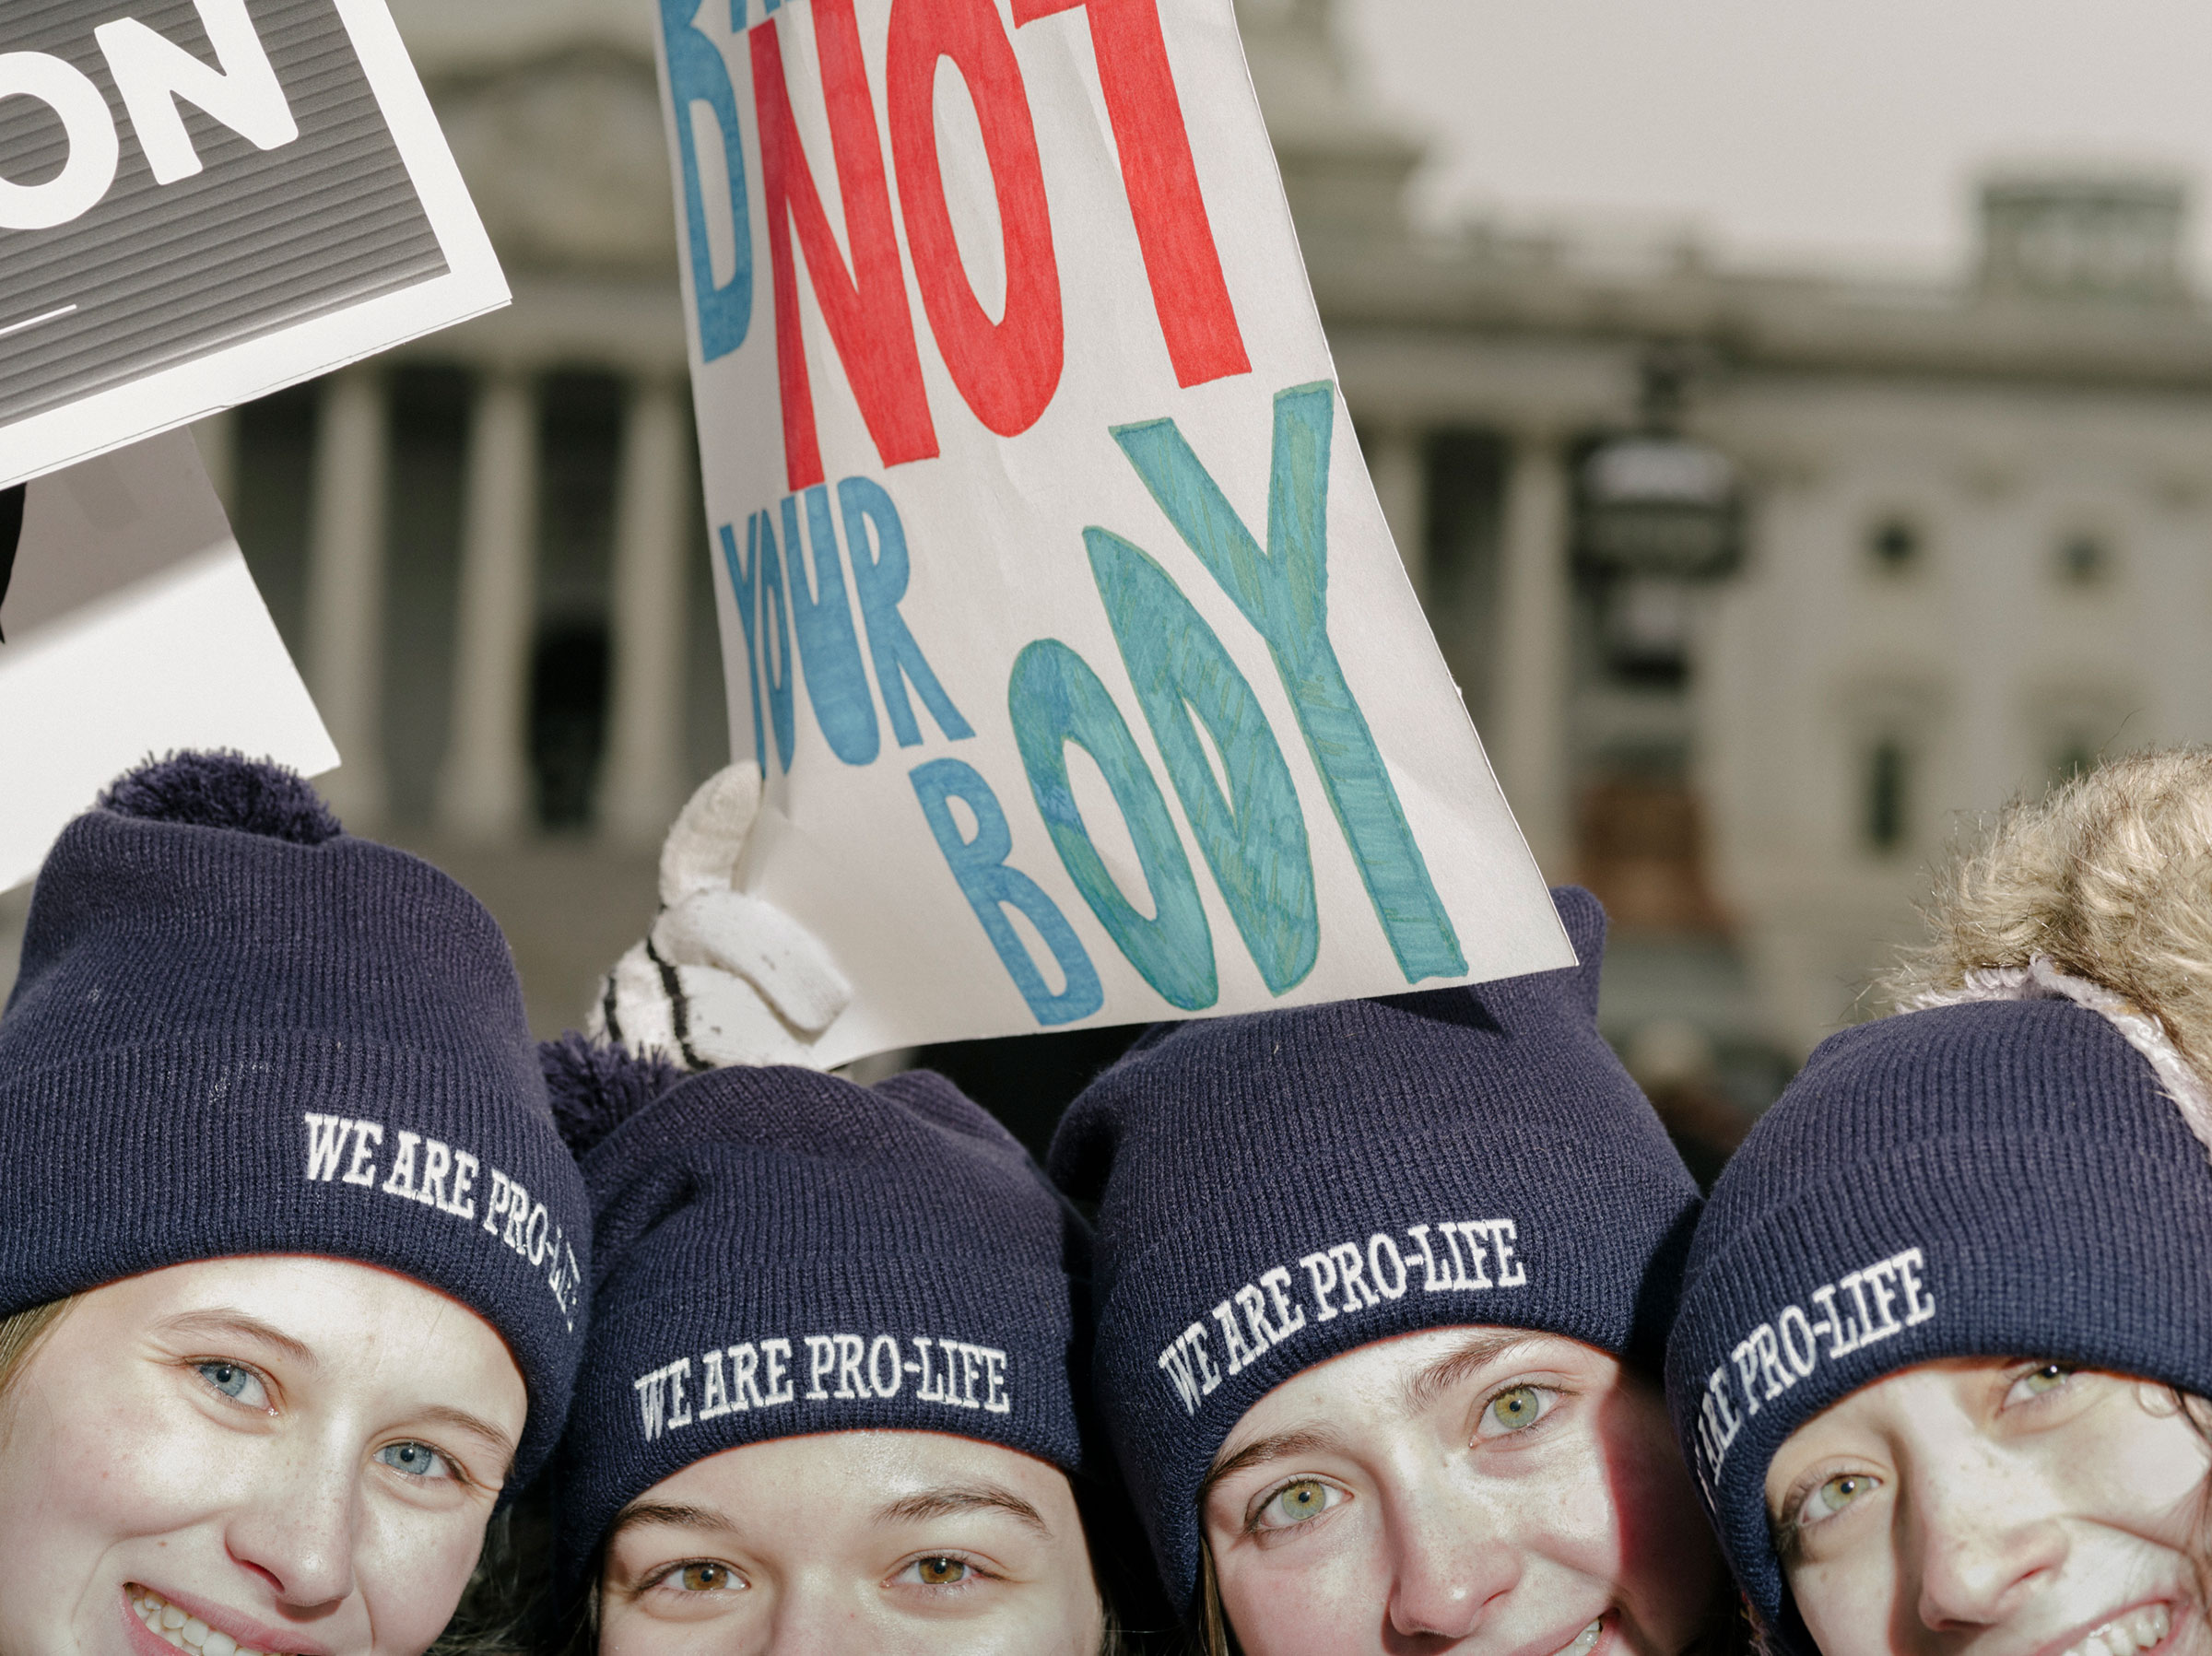 Attendees of the March for Life, held the day before the anniversary of the Supreme Court ruling of Roe v. Wade, stand in front of the Supreme Court building in Washington, on Jan. 21, 2022. (M. Levy for TIME)